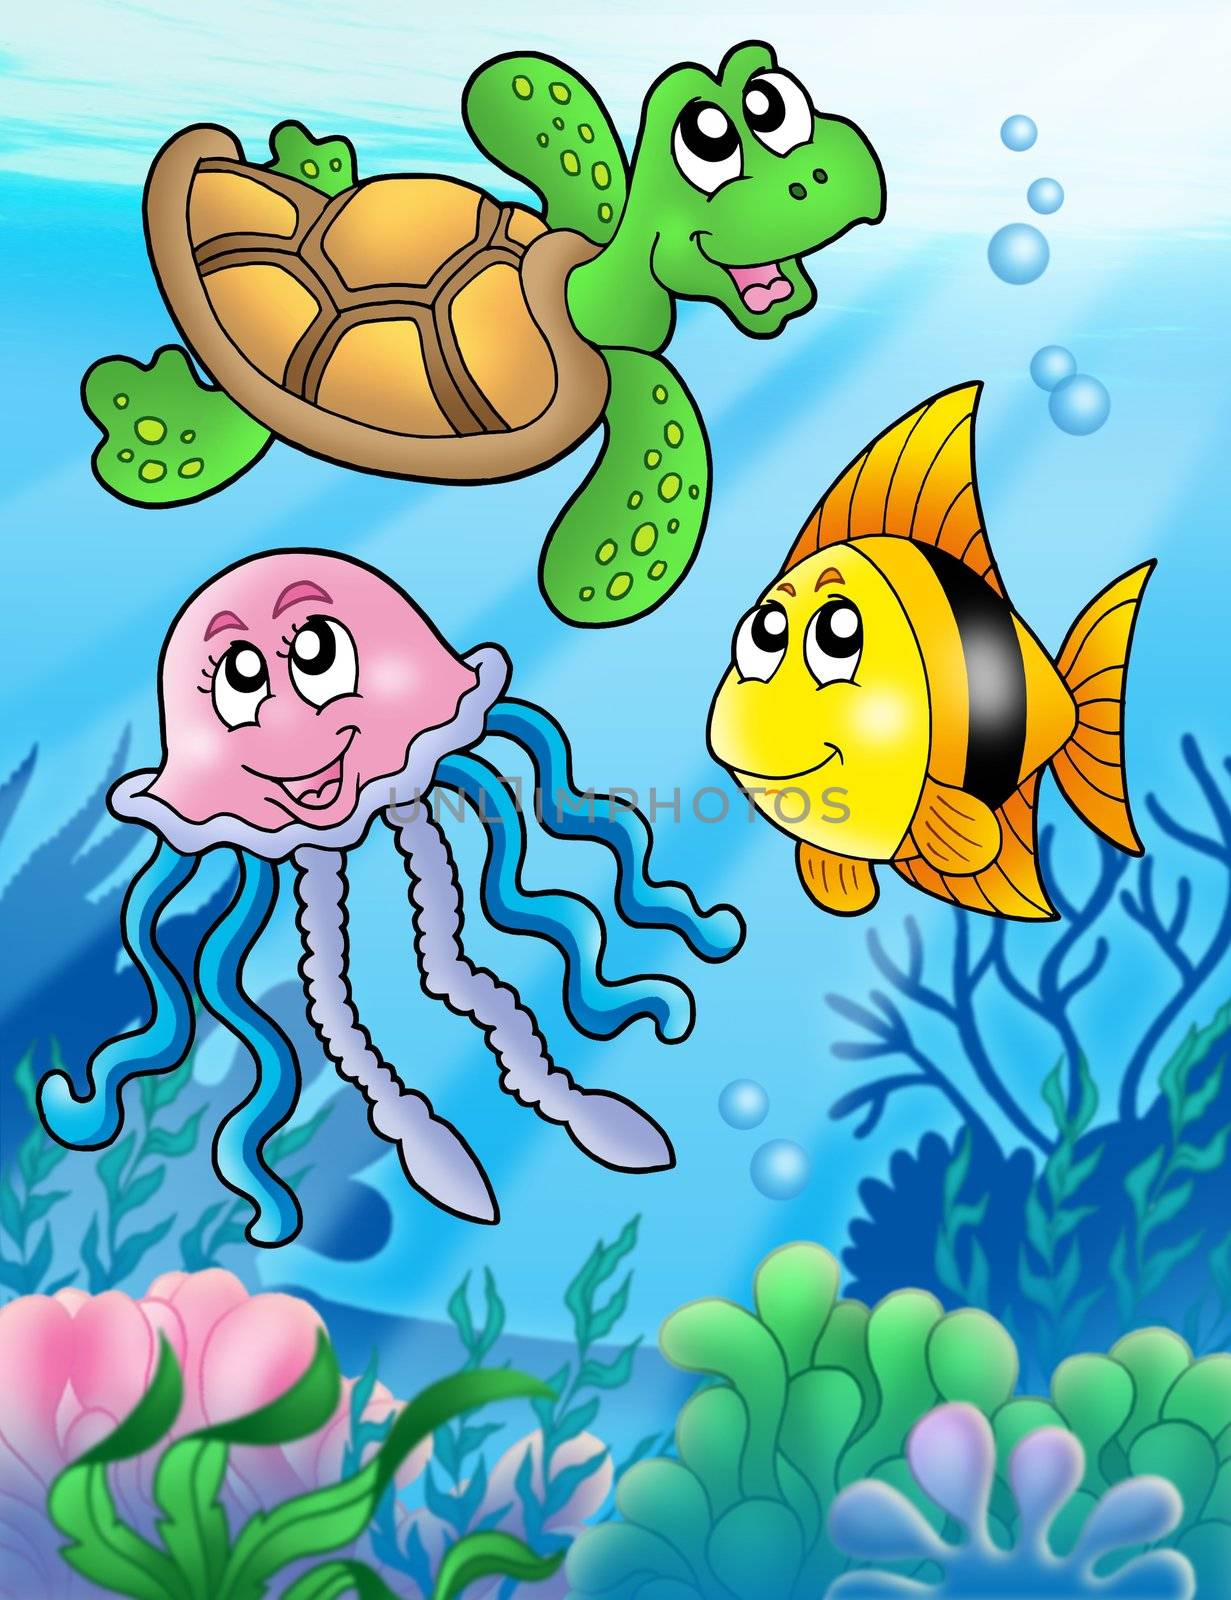 Various sea fishes and animals - color illustration.